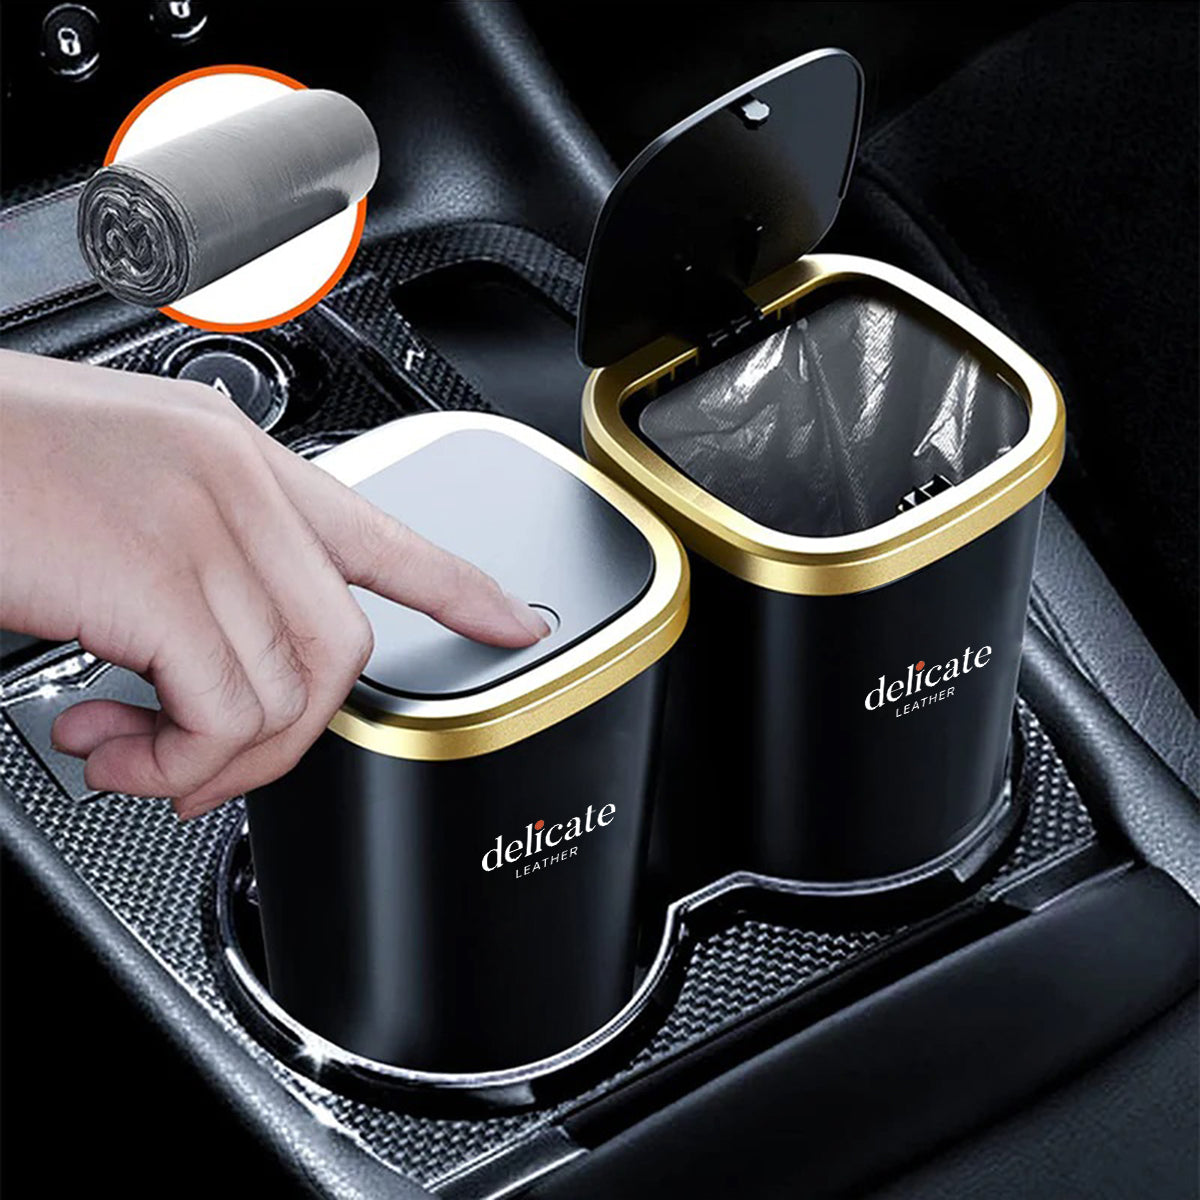 Car Trash Cans, Custom For Your Cars, Compact & Durable Car Accessories for Interior Use 2 Pack, Practical Car Organizers and Storage Cups with Pop-Up Open, Car Accessories VE11993 - Delicate Leather